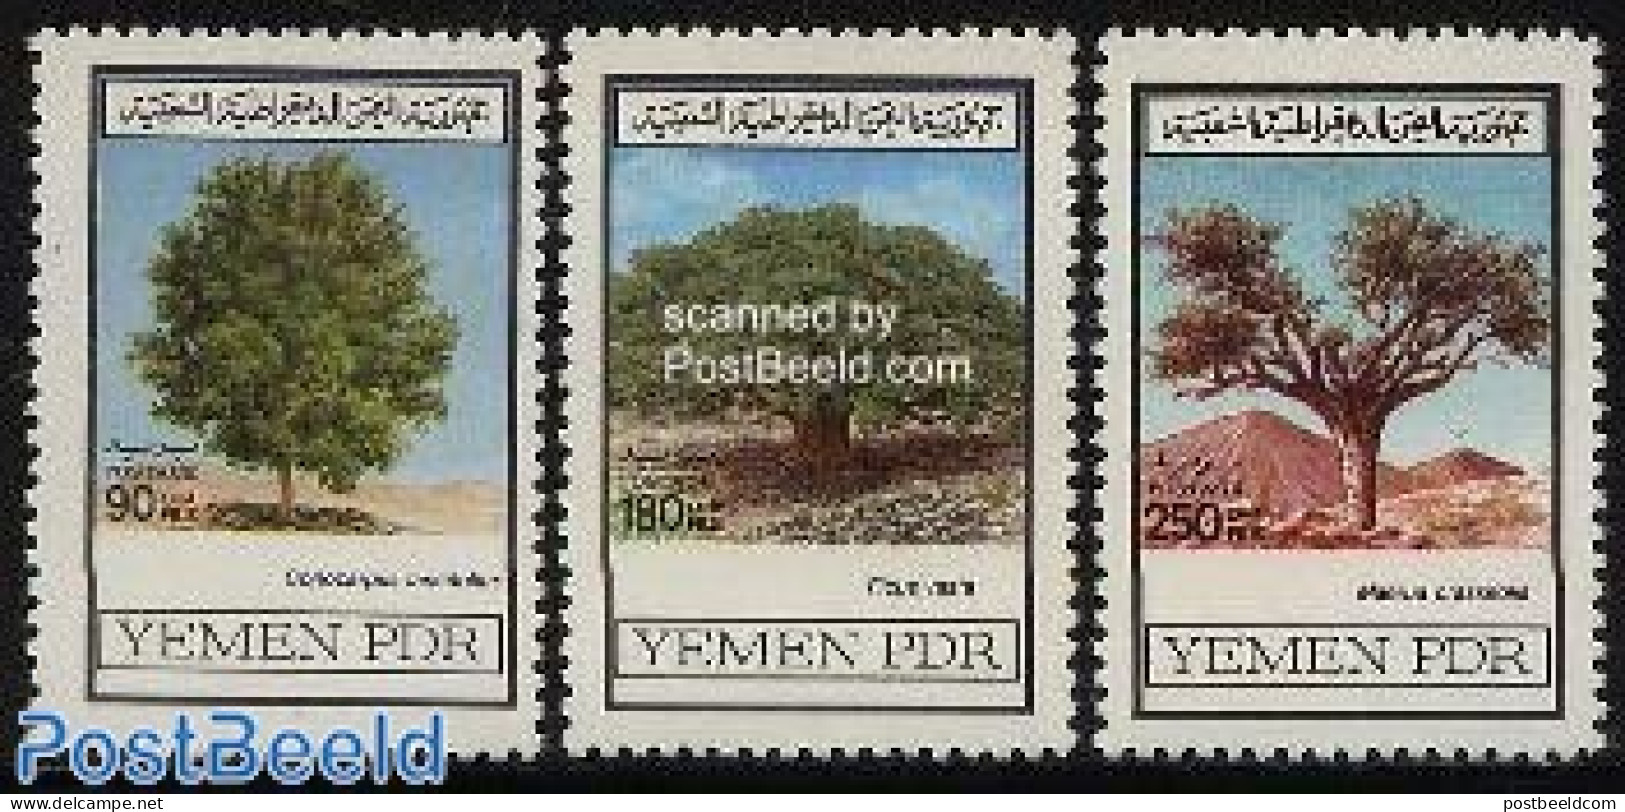 Yemen, South 1981 Trees 3v, Mint NH, Nature - Trees & Forests - Rotary, Lions Club